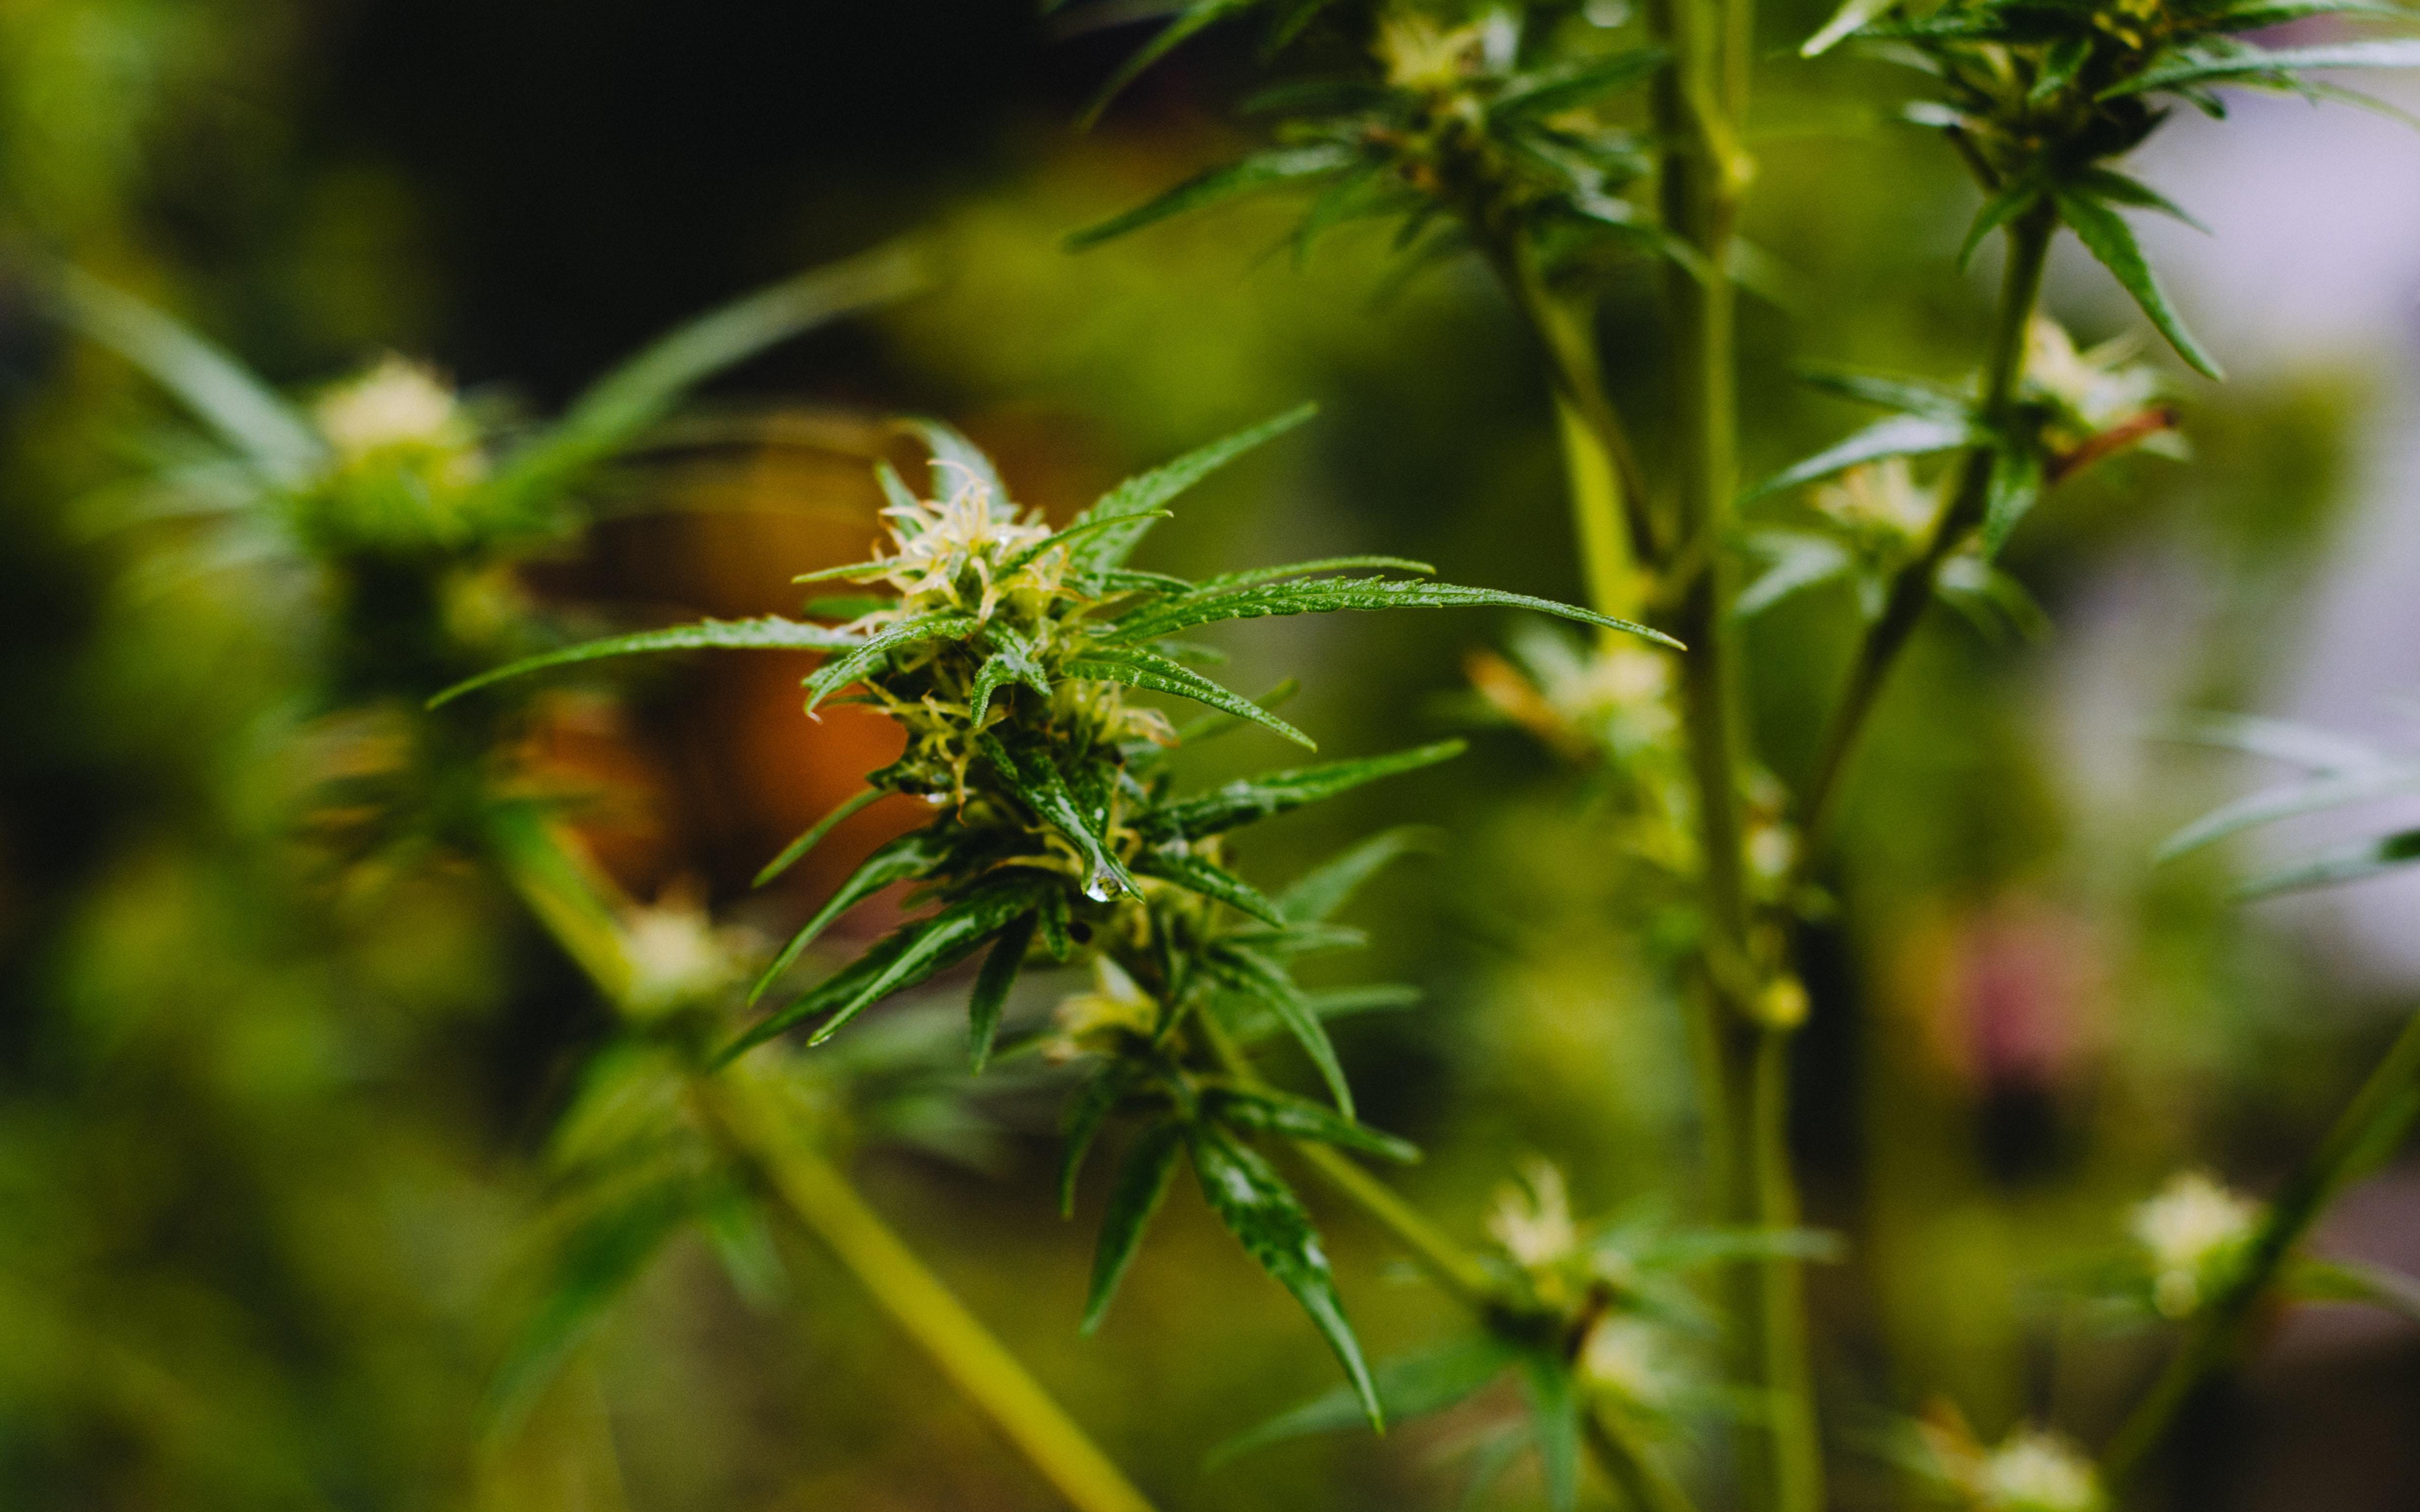 A Guide To Terpenes: What Are They And Why Are They Important? - Coastal Hemp Co